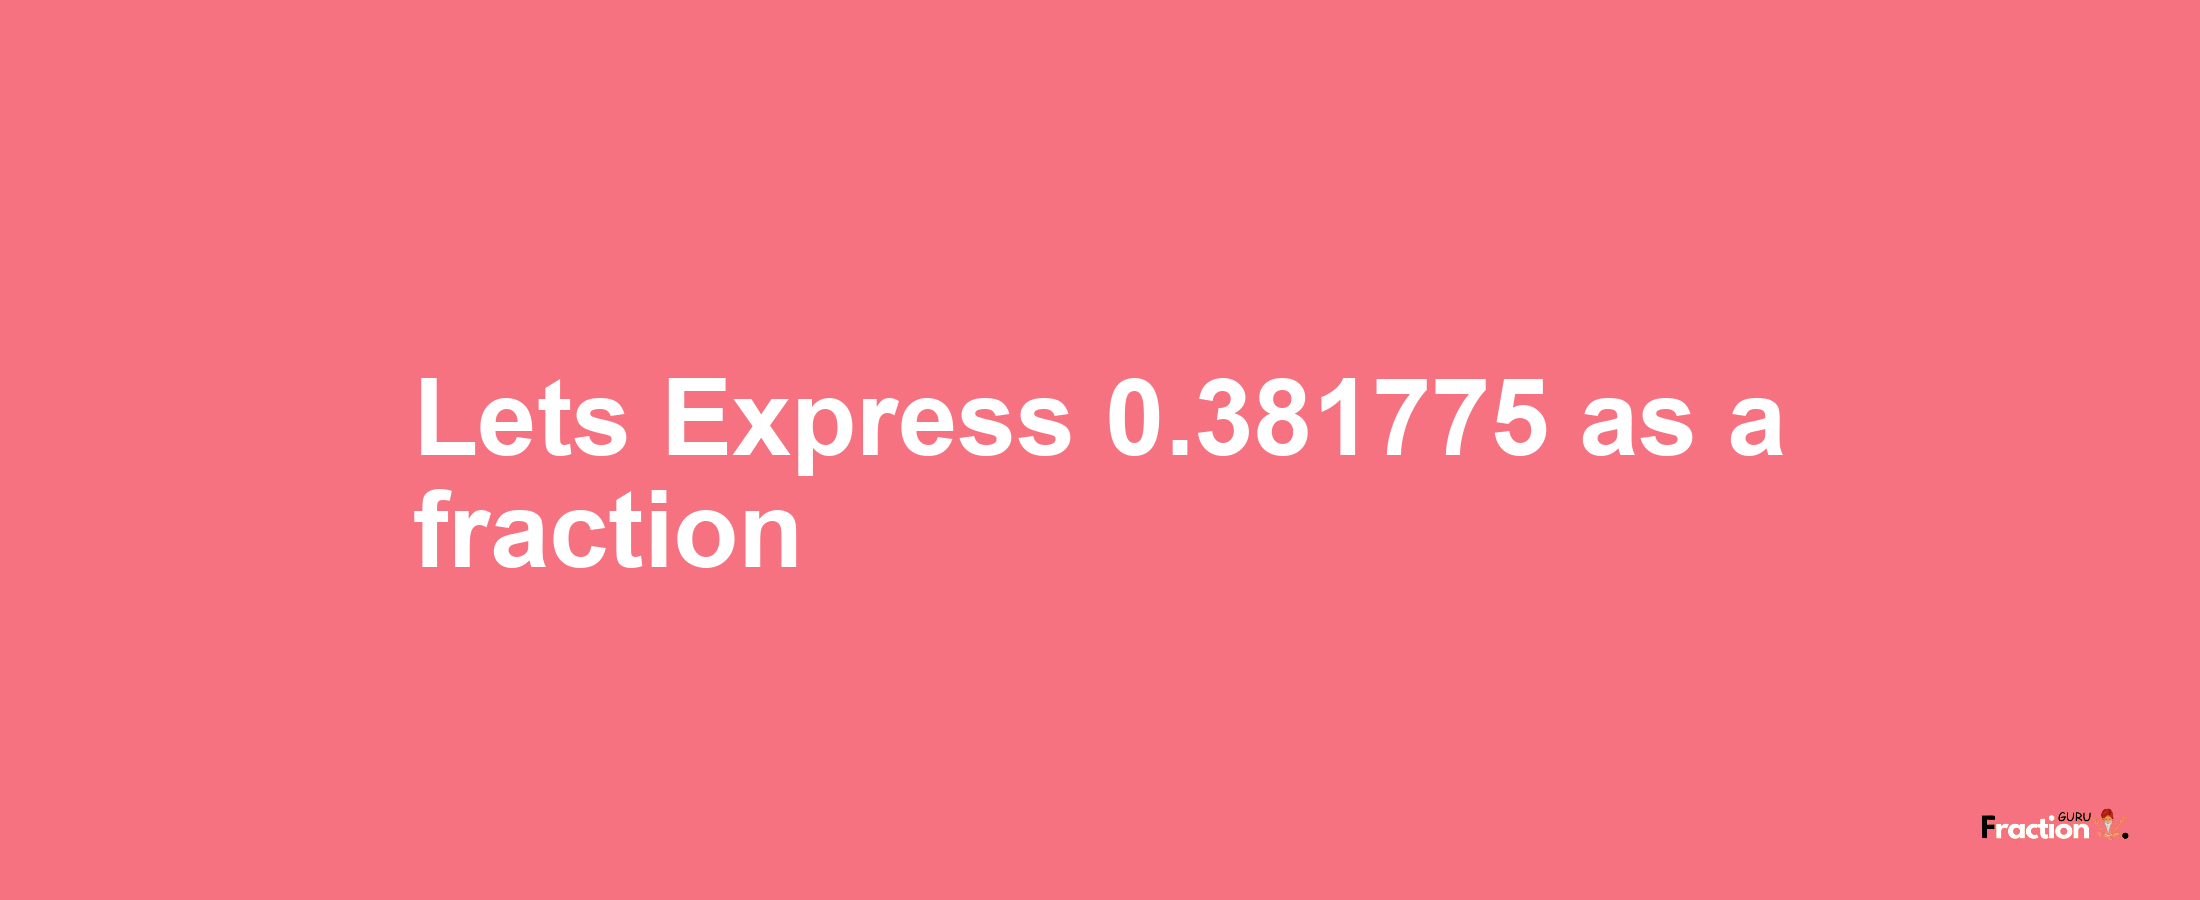 Lets Express 0.381775 as afraction